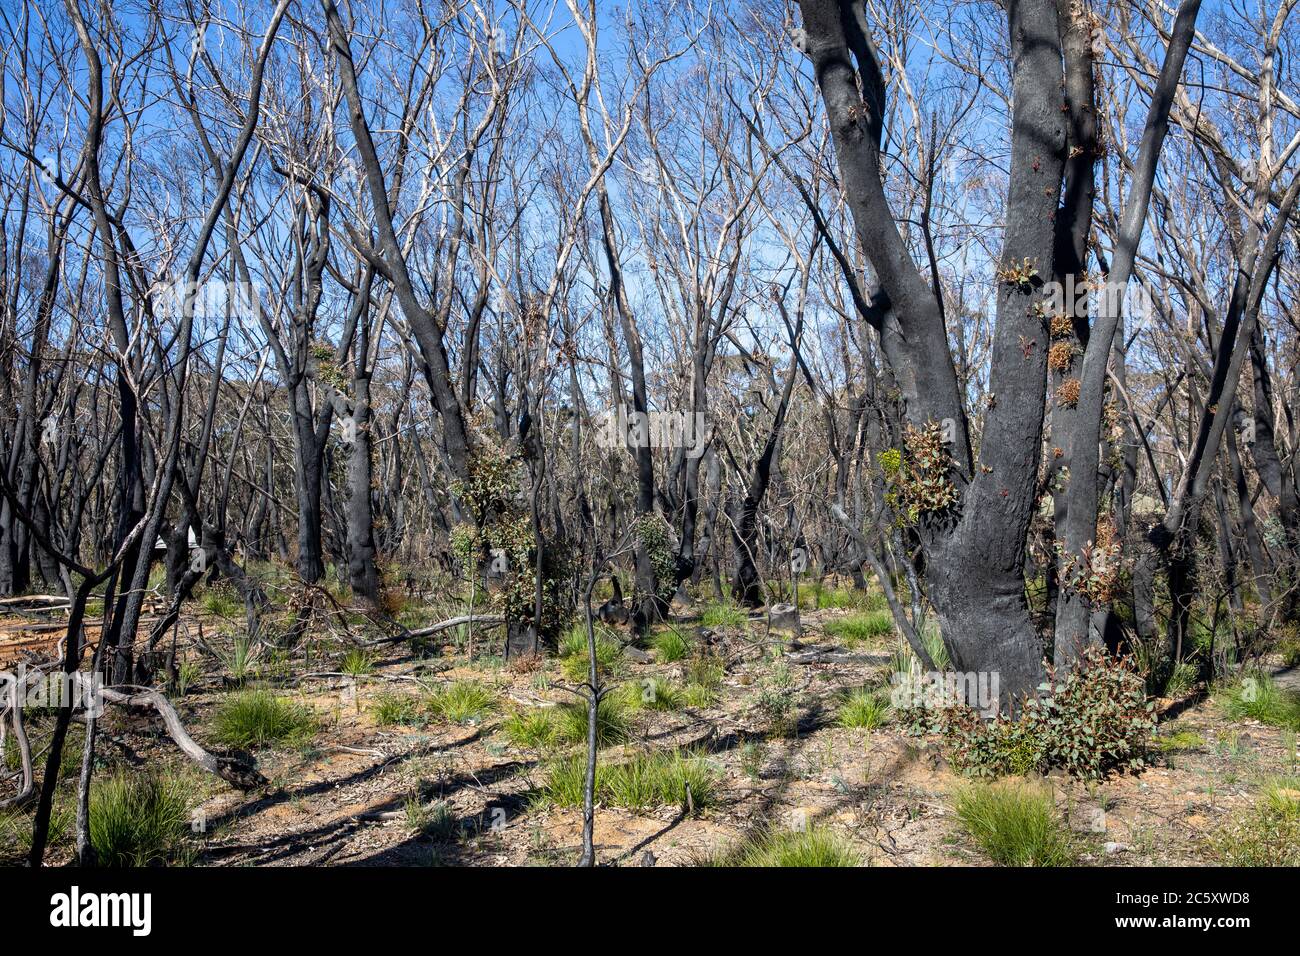 Australia bush foires 2020 in Blue mountains national park nsw with green shoots of recovery post the fires,Australia Stock Photo